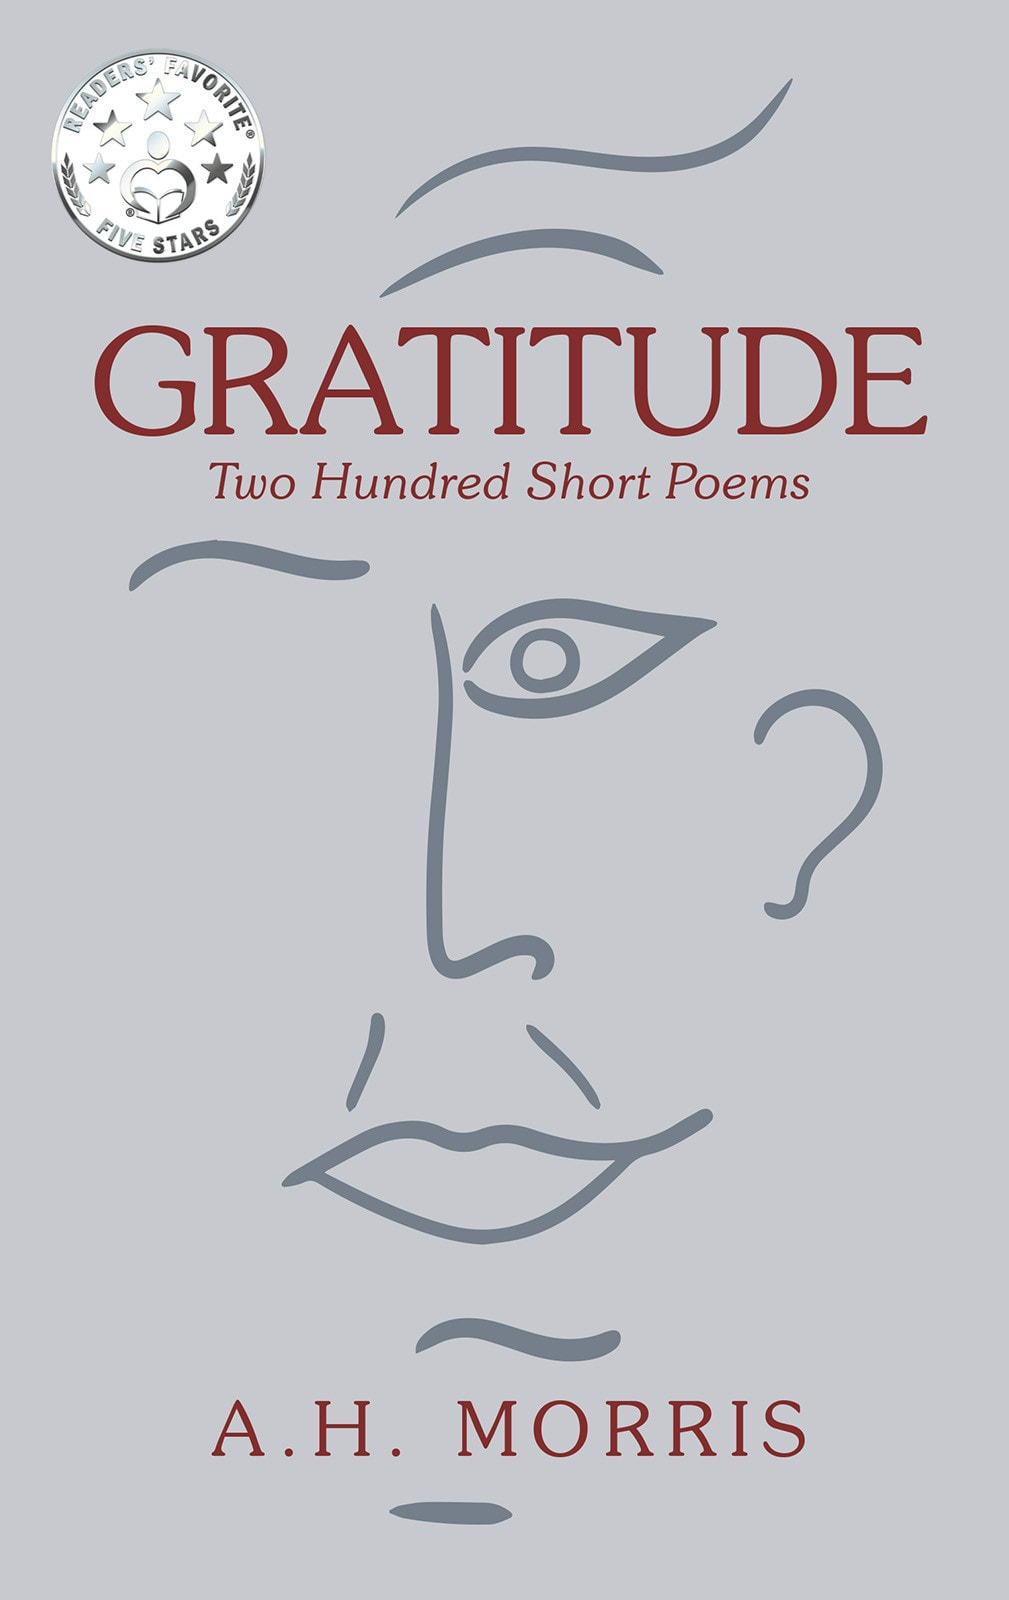 GRATITUDE: TWO HUNDRED SHORT POEMS by A. H. Morris